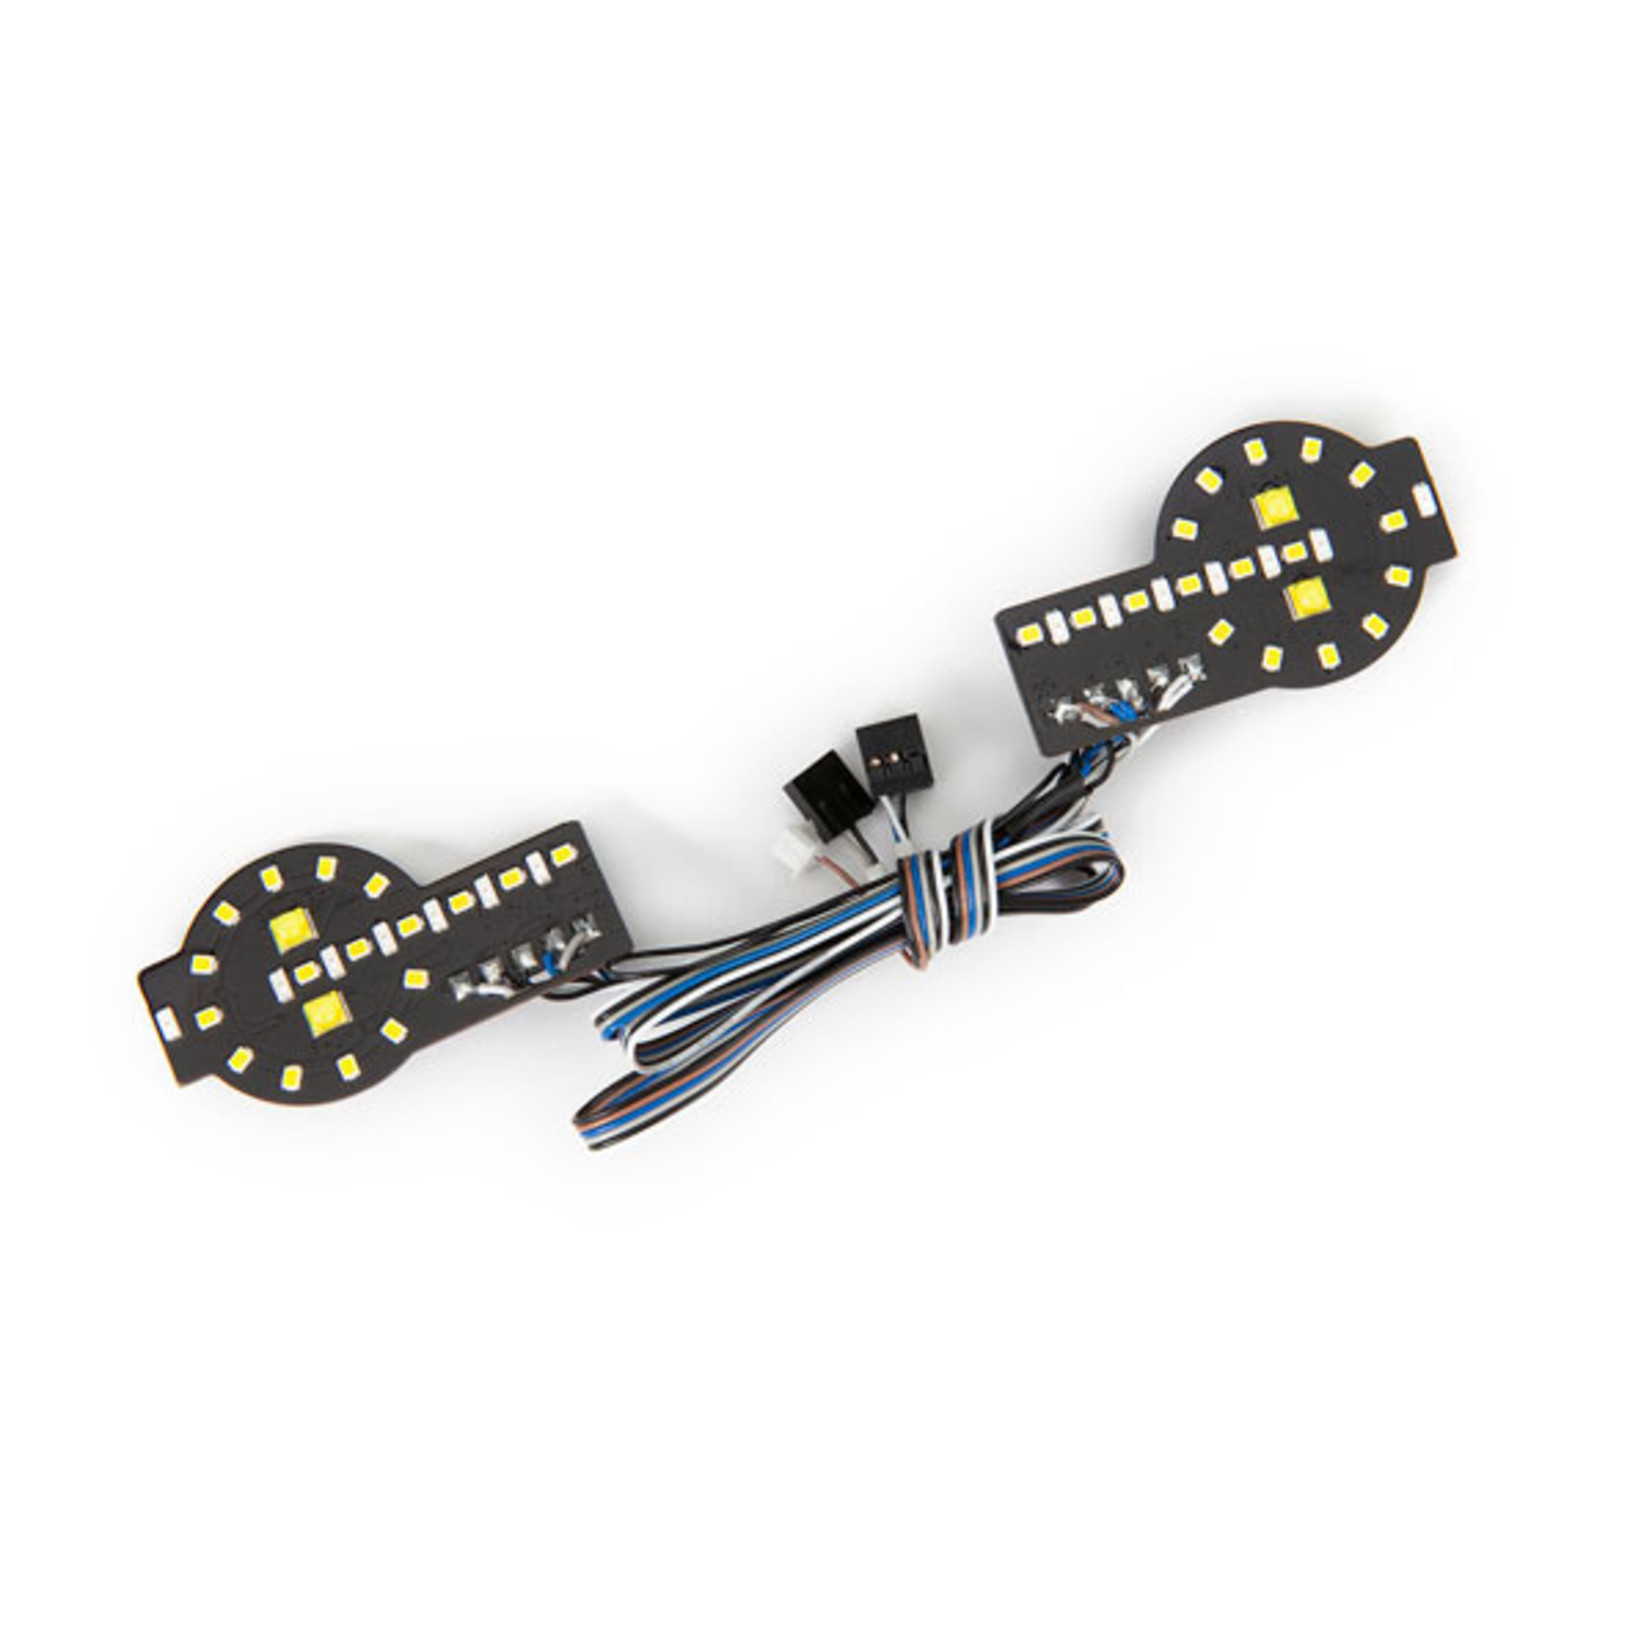 Traxxas 9291 - Front light harness, Ford Bronco (requires